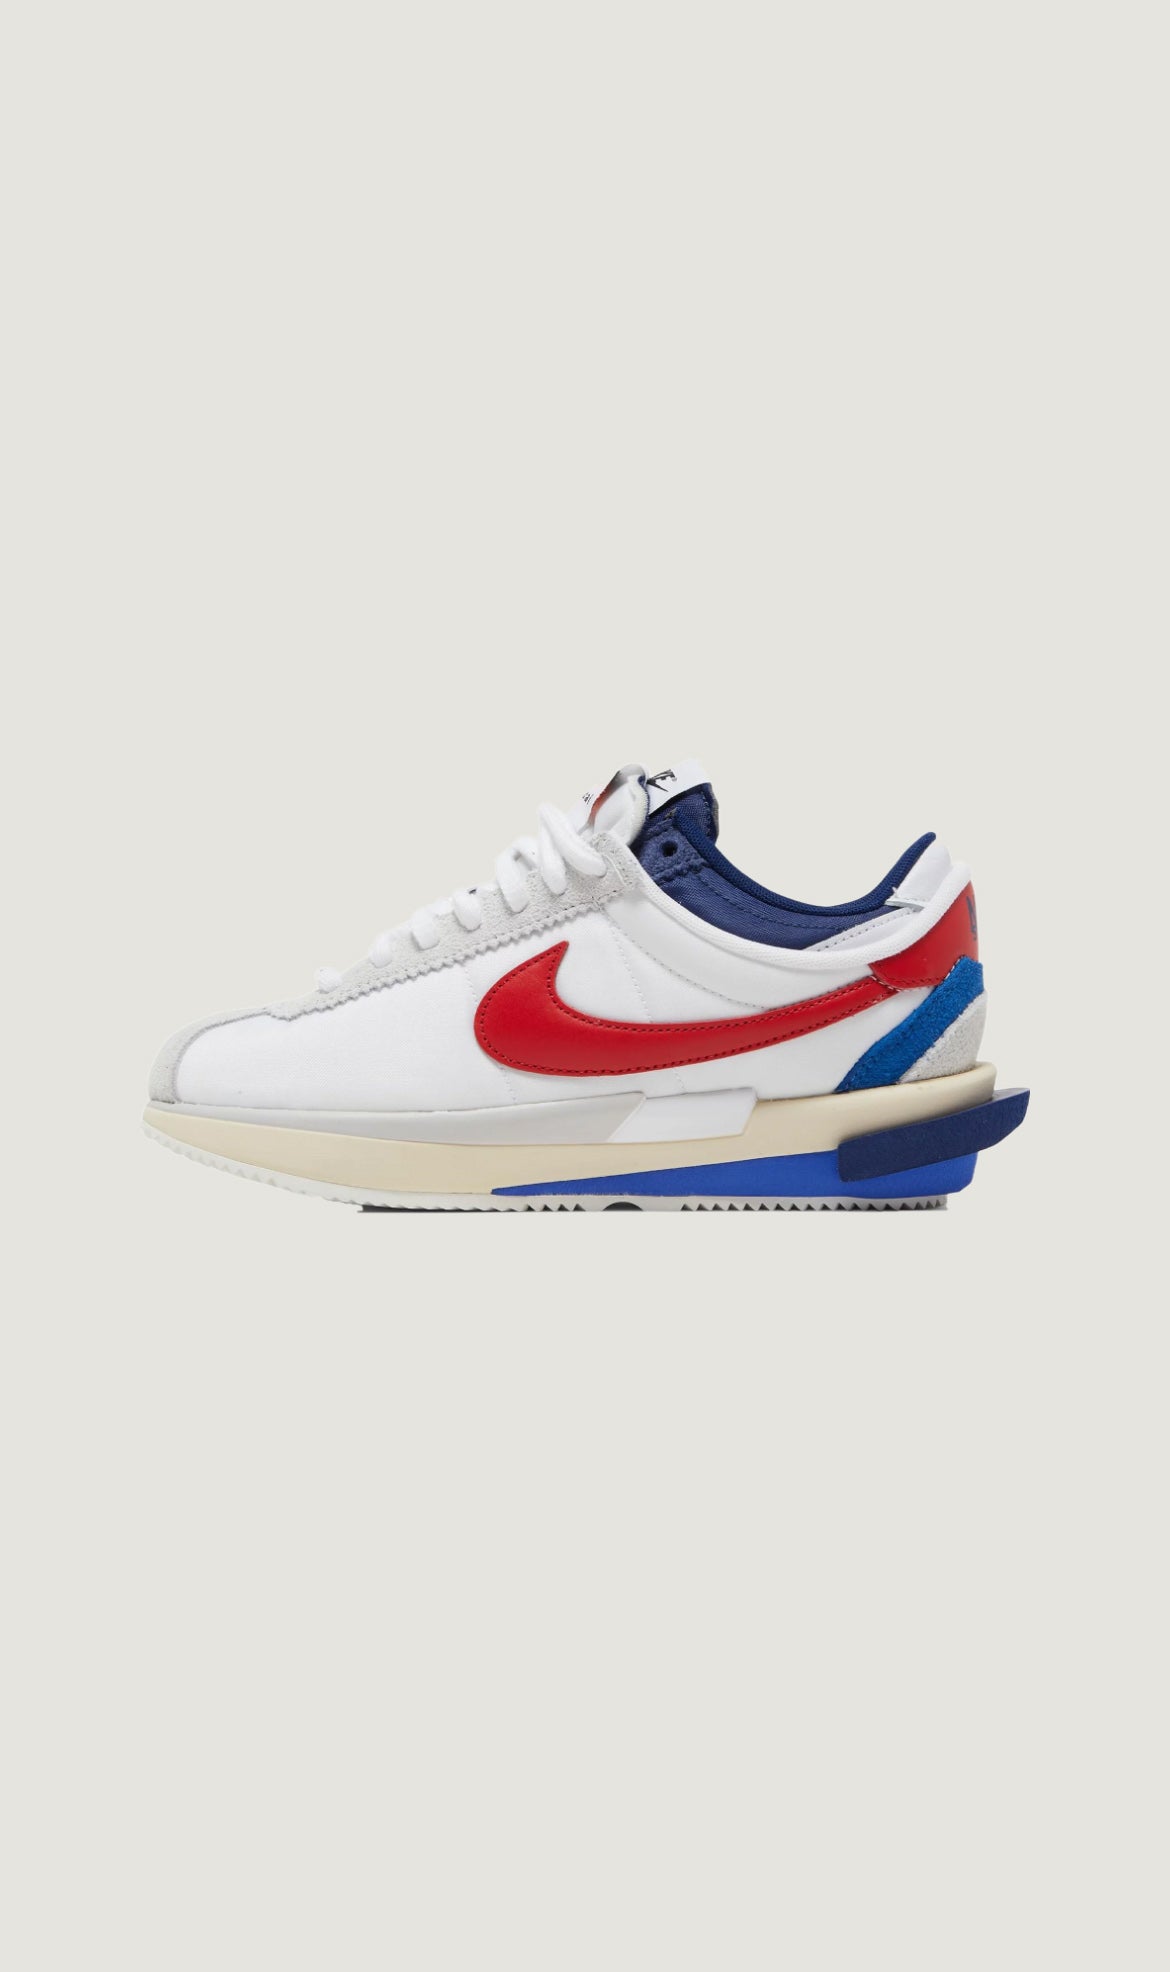 Load image into Gallery viewer, SACAI x CORTEZ 4.0 - OG
